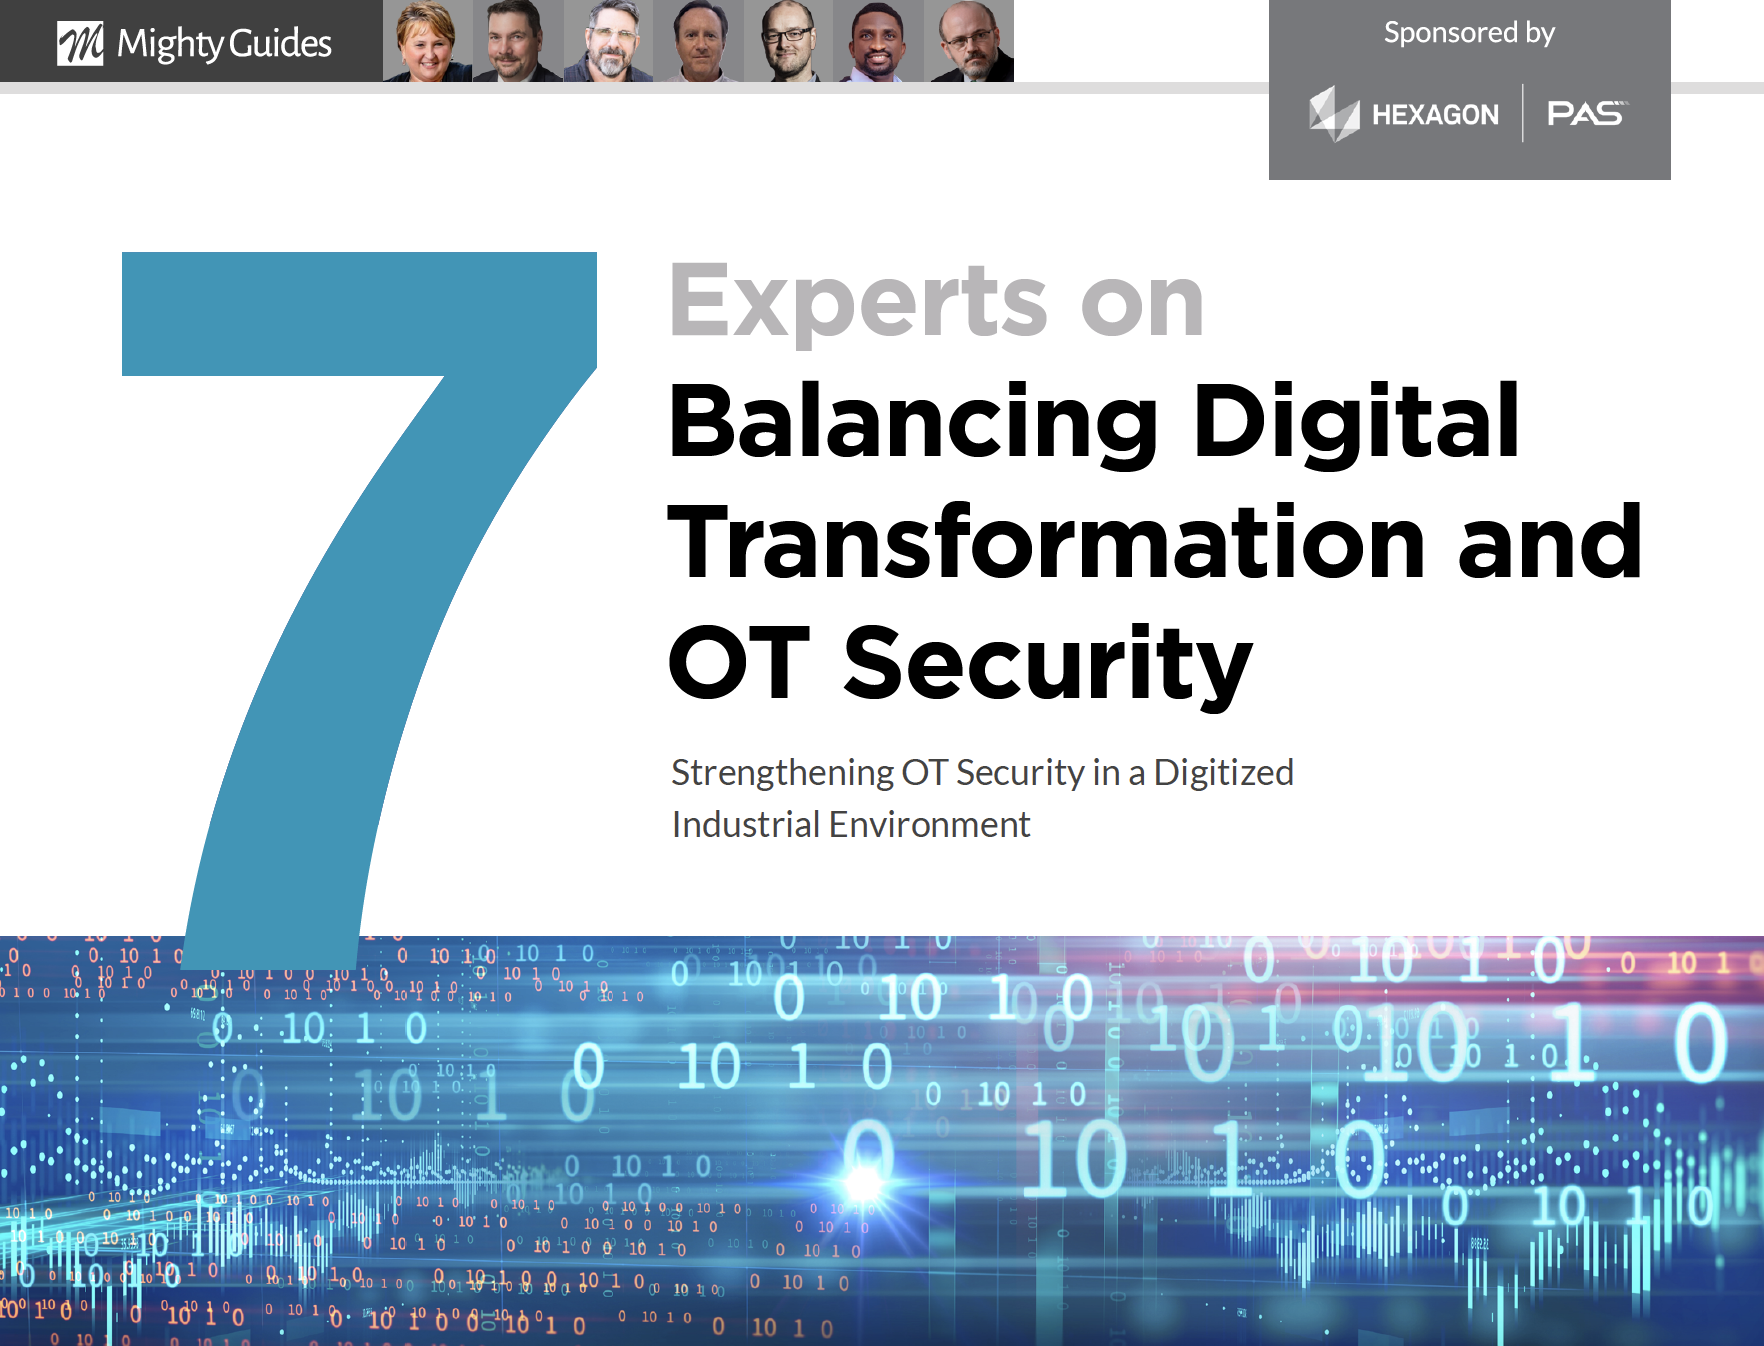 PAS: 7 Experts on Balancing Digital Transformation and OT Security